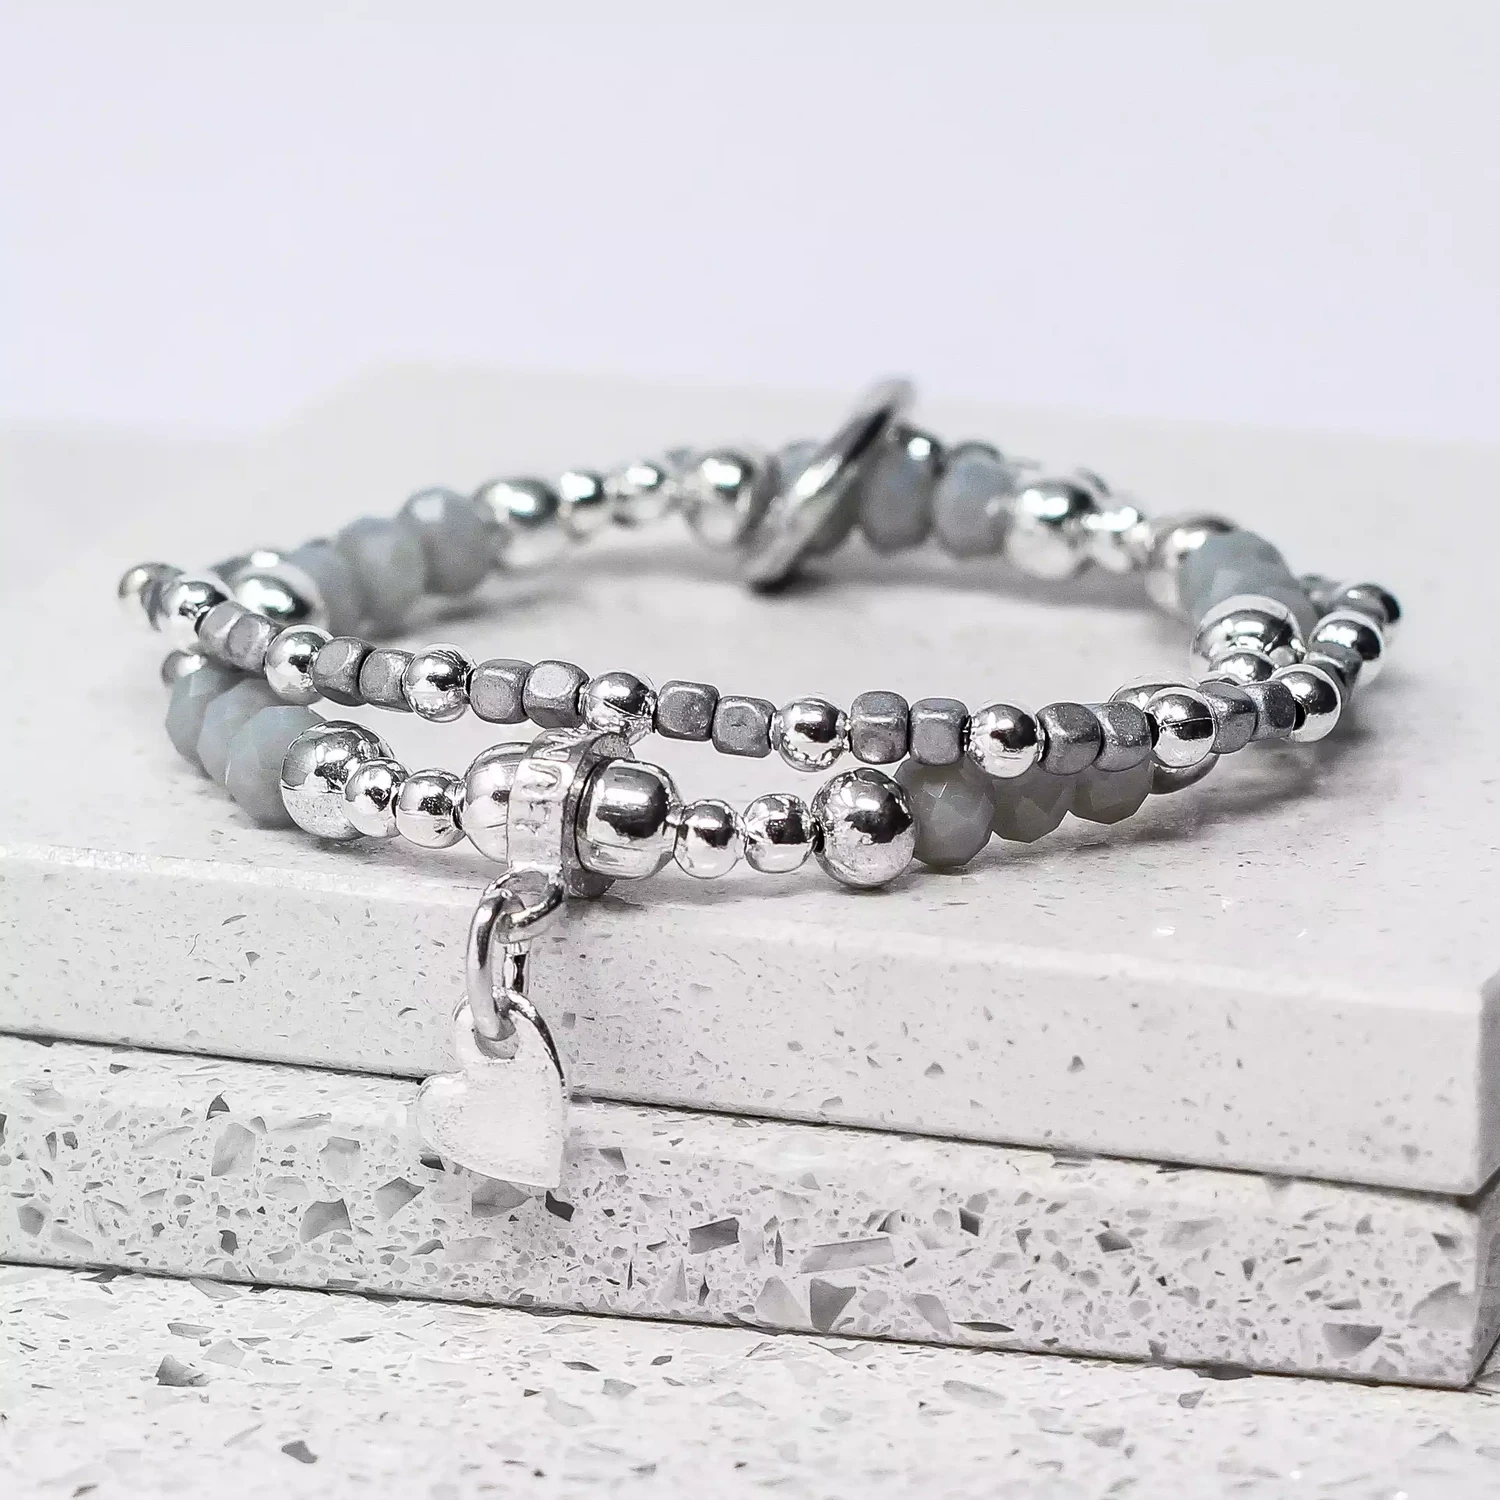 Double Strand Pewter and Glass Bead Bracelet - Dove Grey by Metal Planet